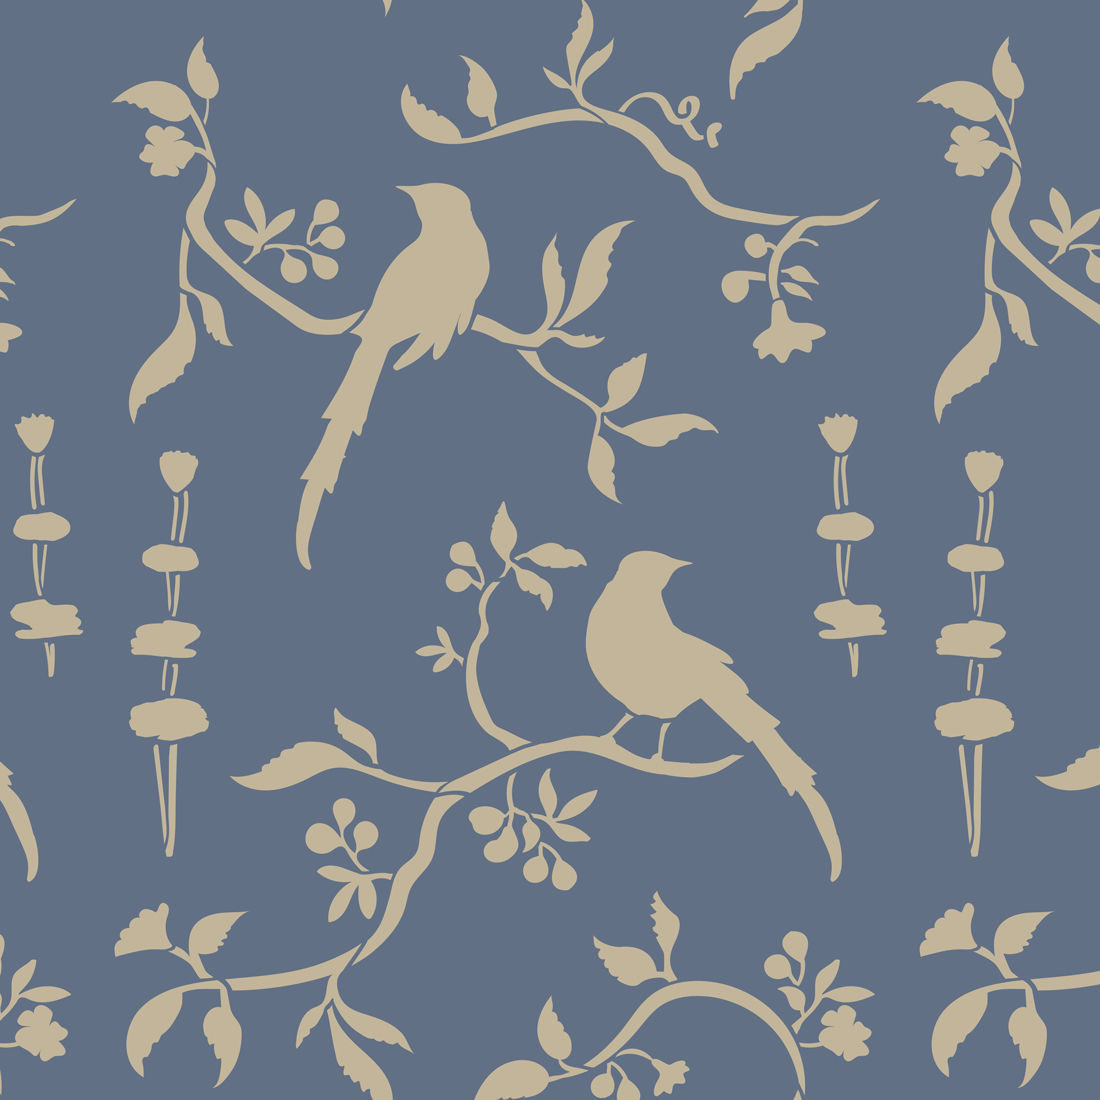 1613557348Cinoiserie-Birds-Country-Grey-and-Old-Violet-2.jpg